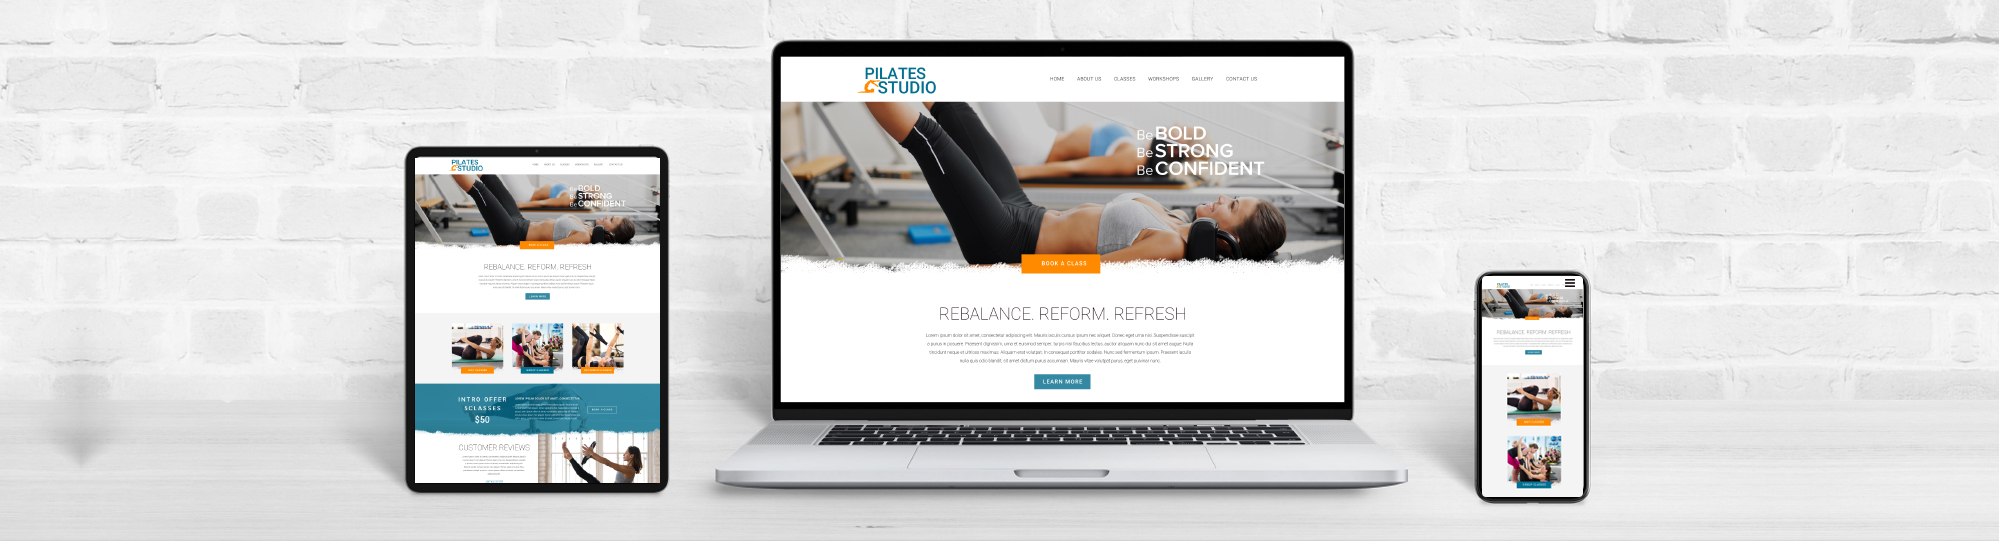 Our Website Design Process for Fitness, Pilates and Yoga Studio